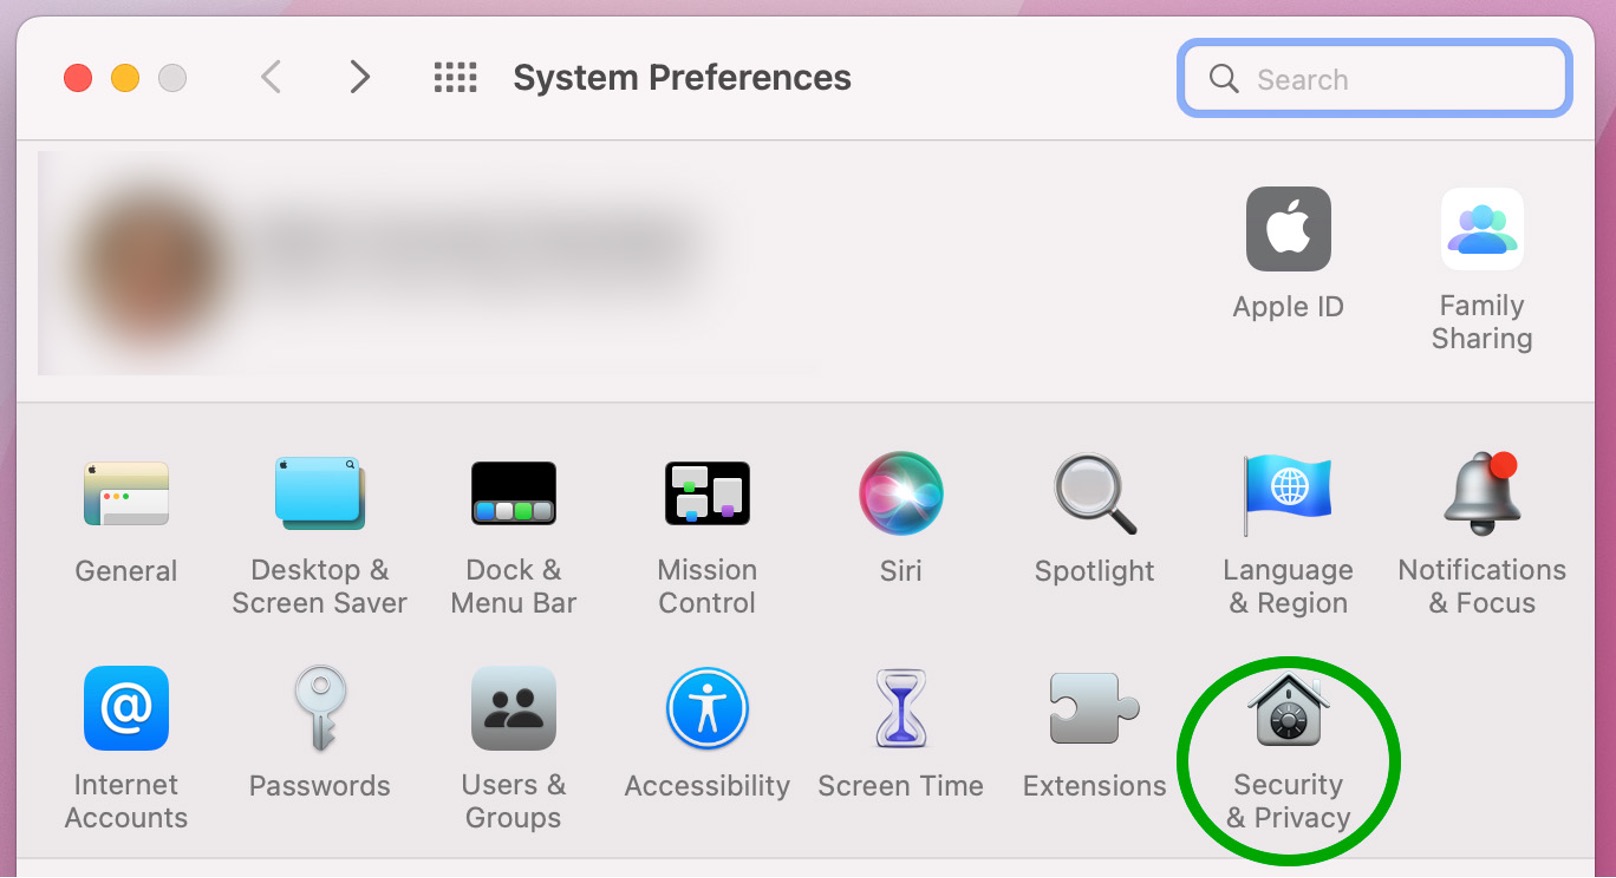 The 'System Preferences' screen with 'Security & Privacy' highlighted.